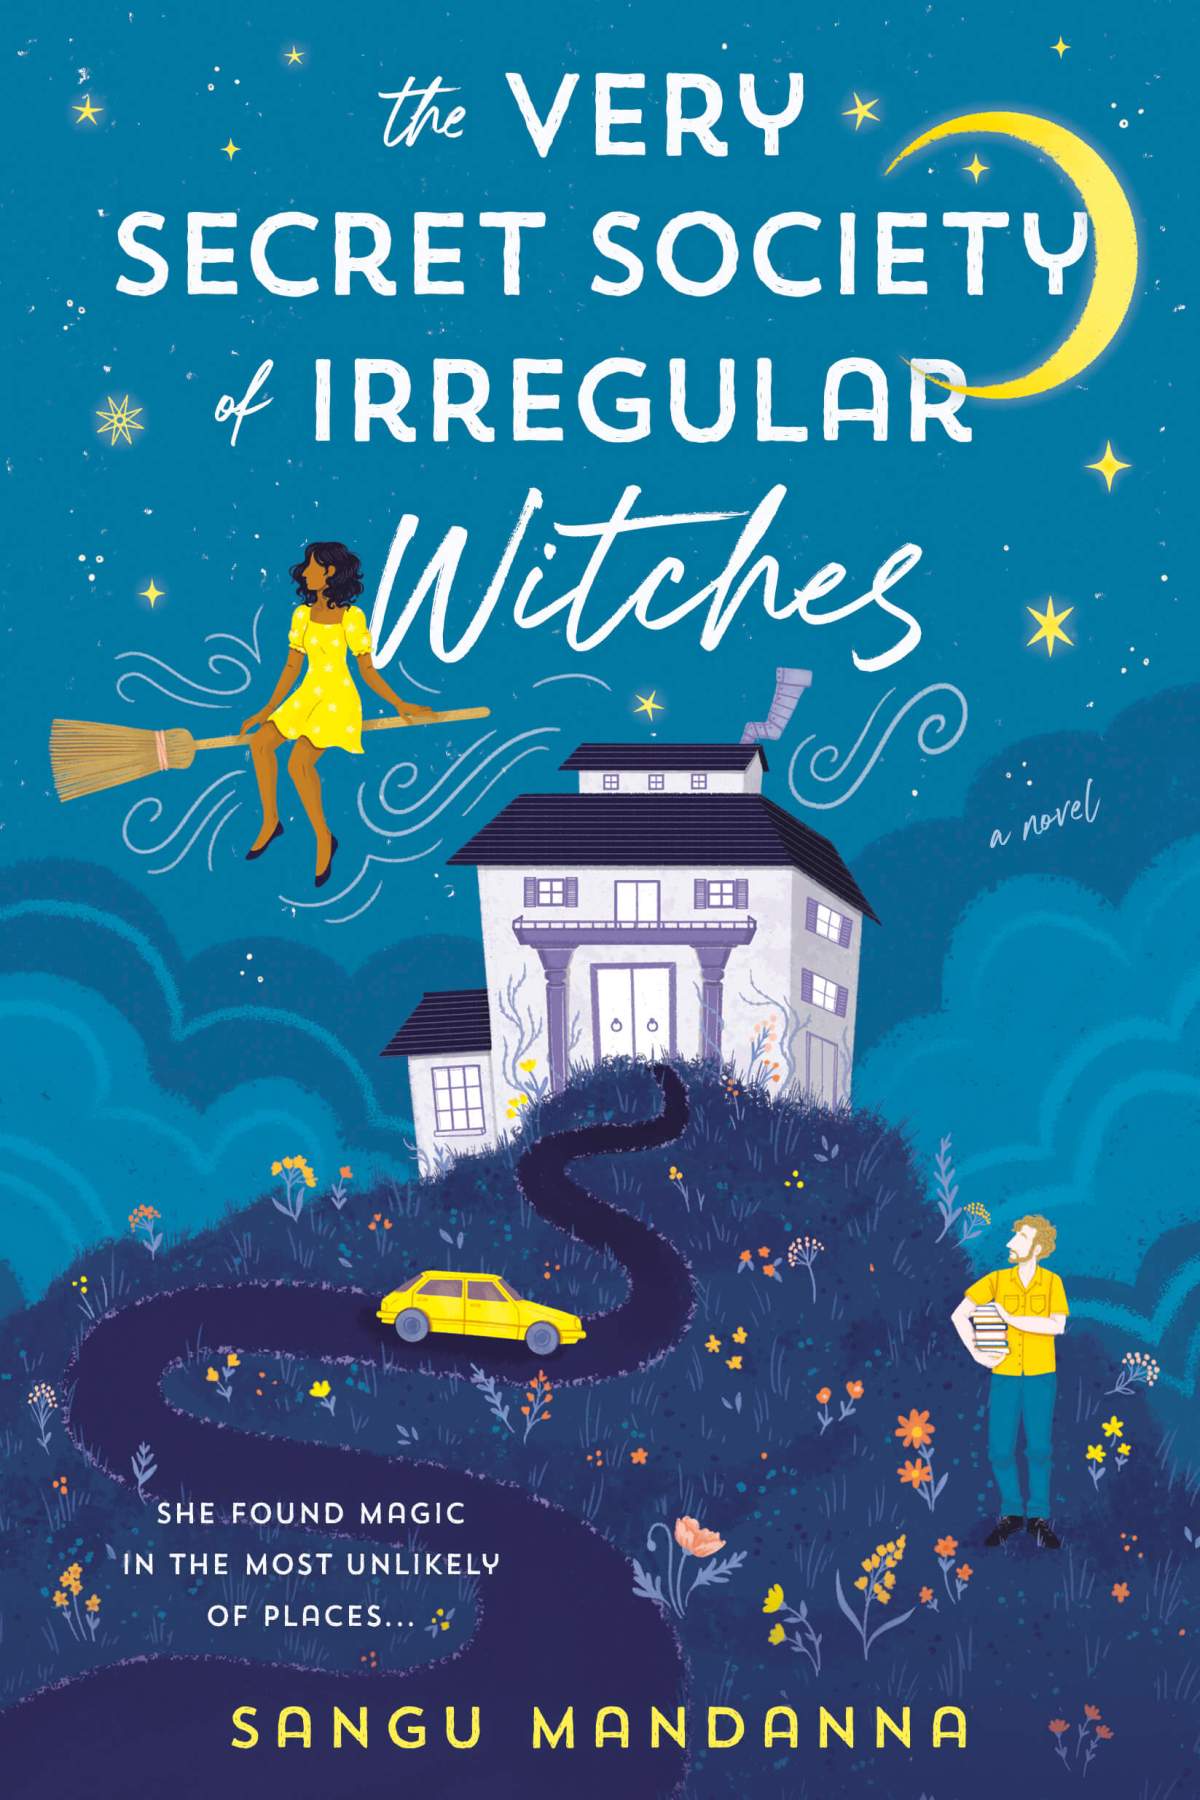 Witchy and relaxing: The Very Secret Society of Irregular Witches by Sangu Mandanna (Book Review)  @PRHGlobal #partner #Halloween #Witches